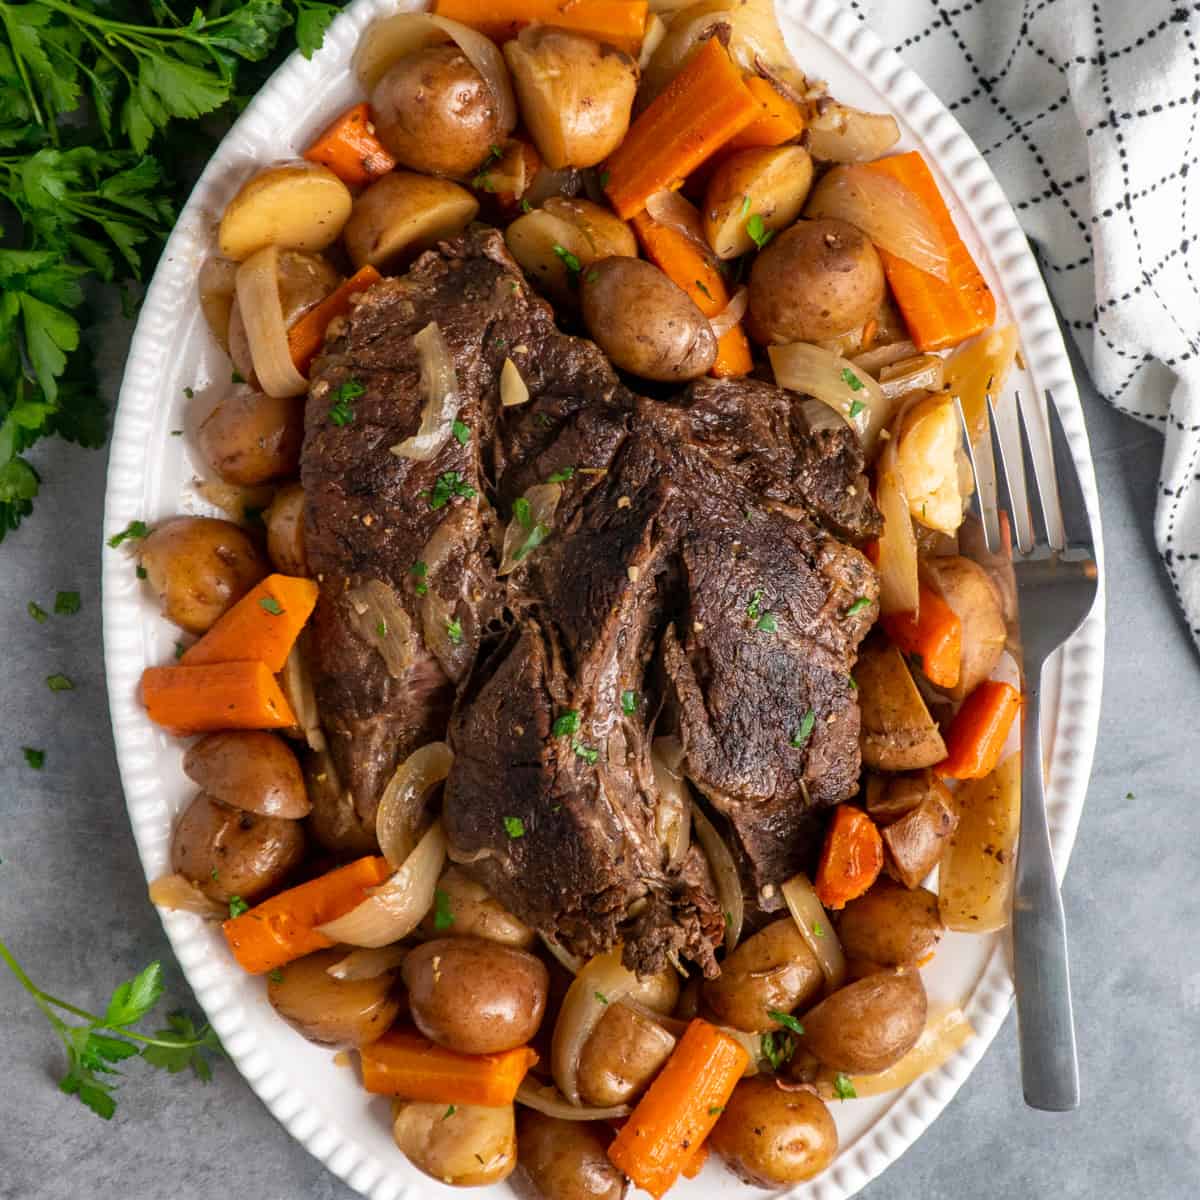 A pot roast on a plate with potatoes and carrots.